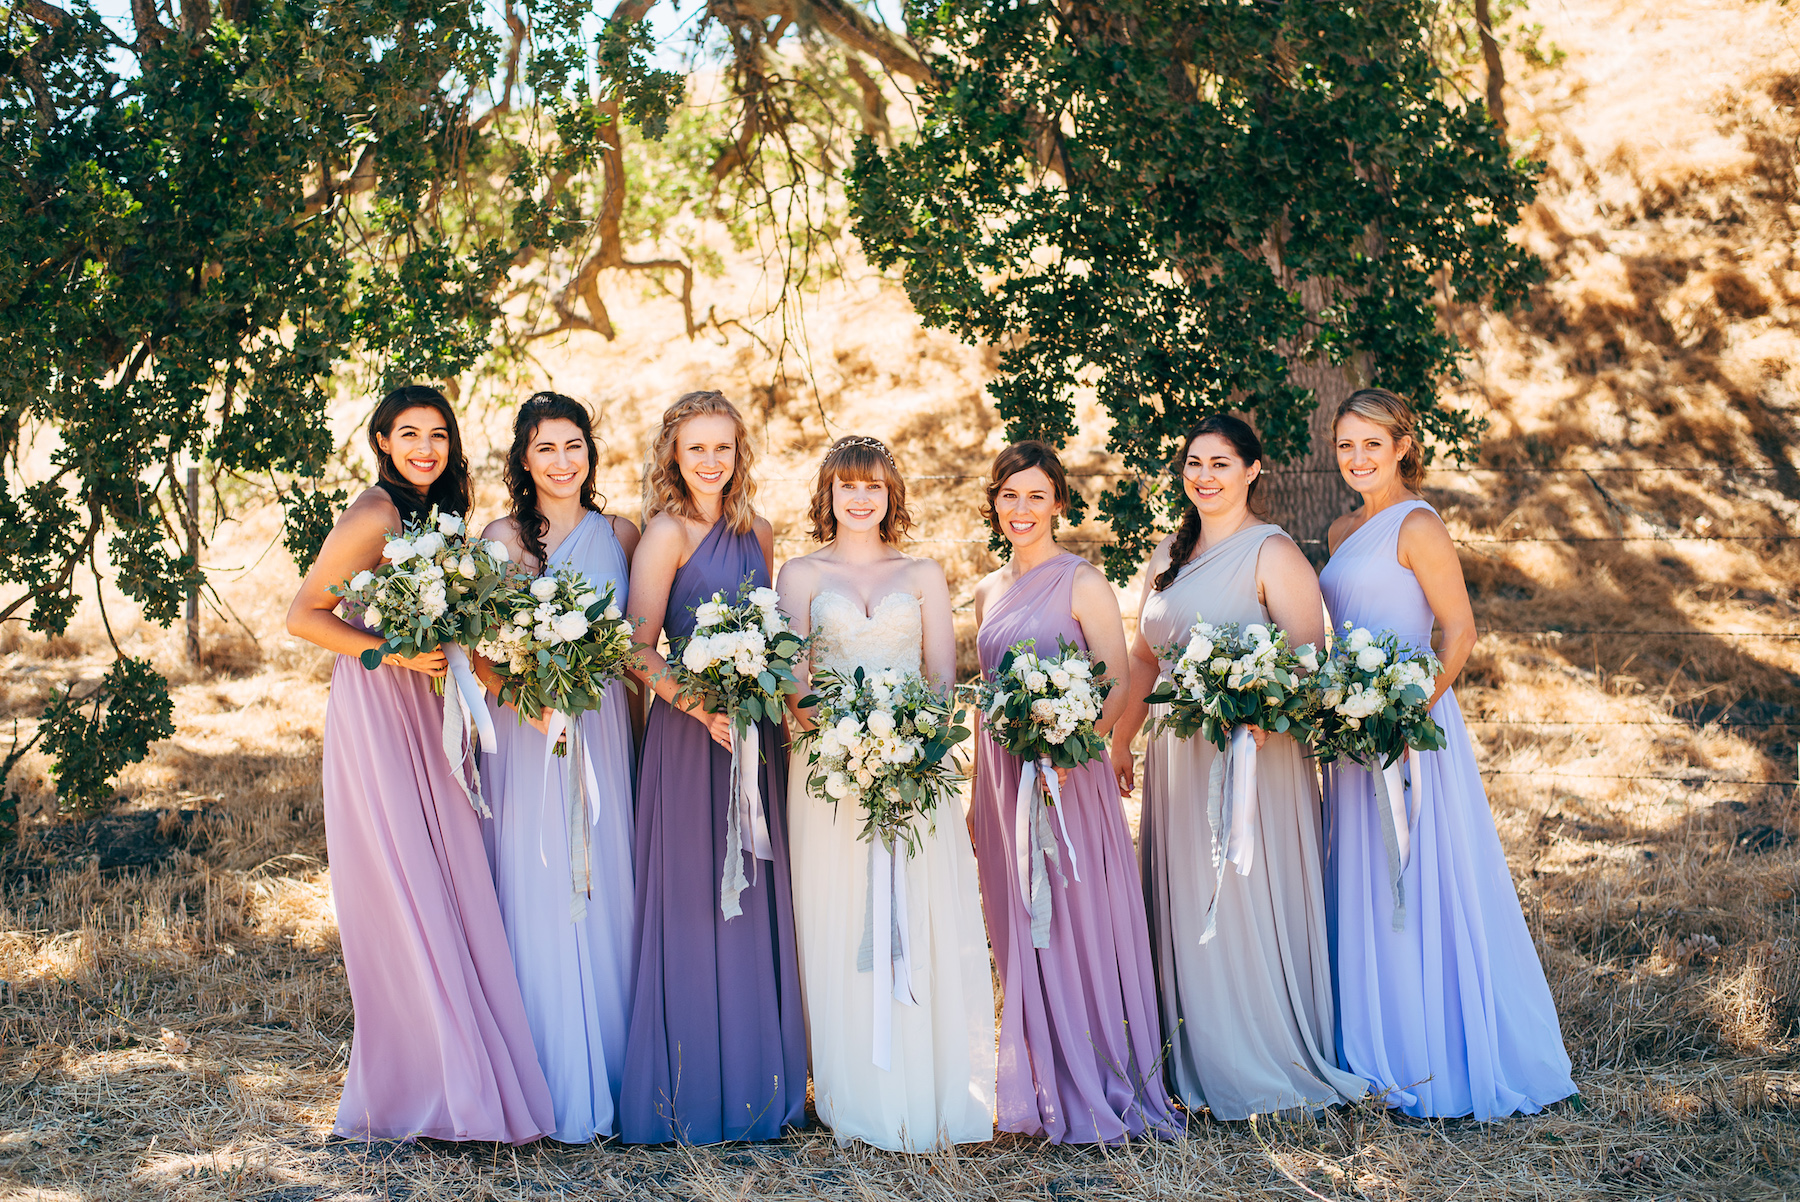 Lavender dresses and white rustic wedding flowers